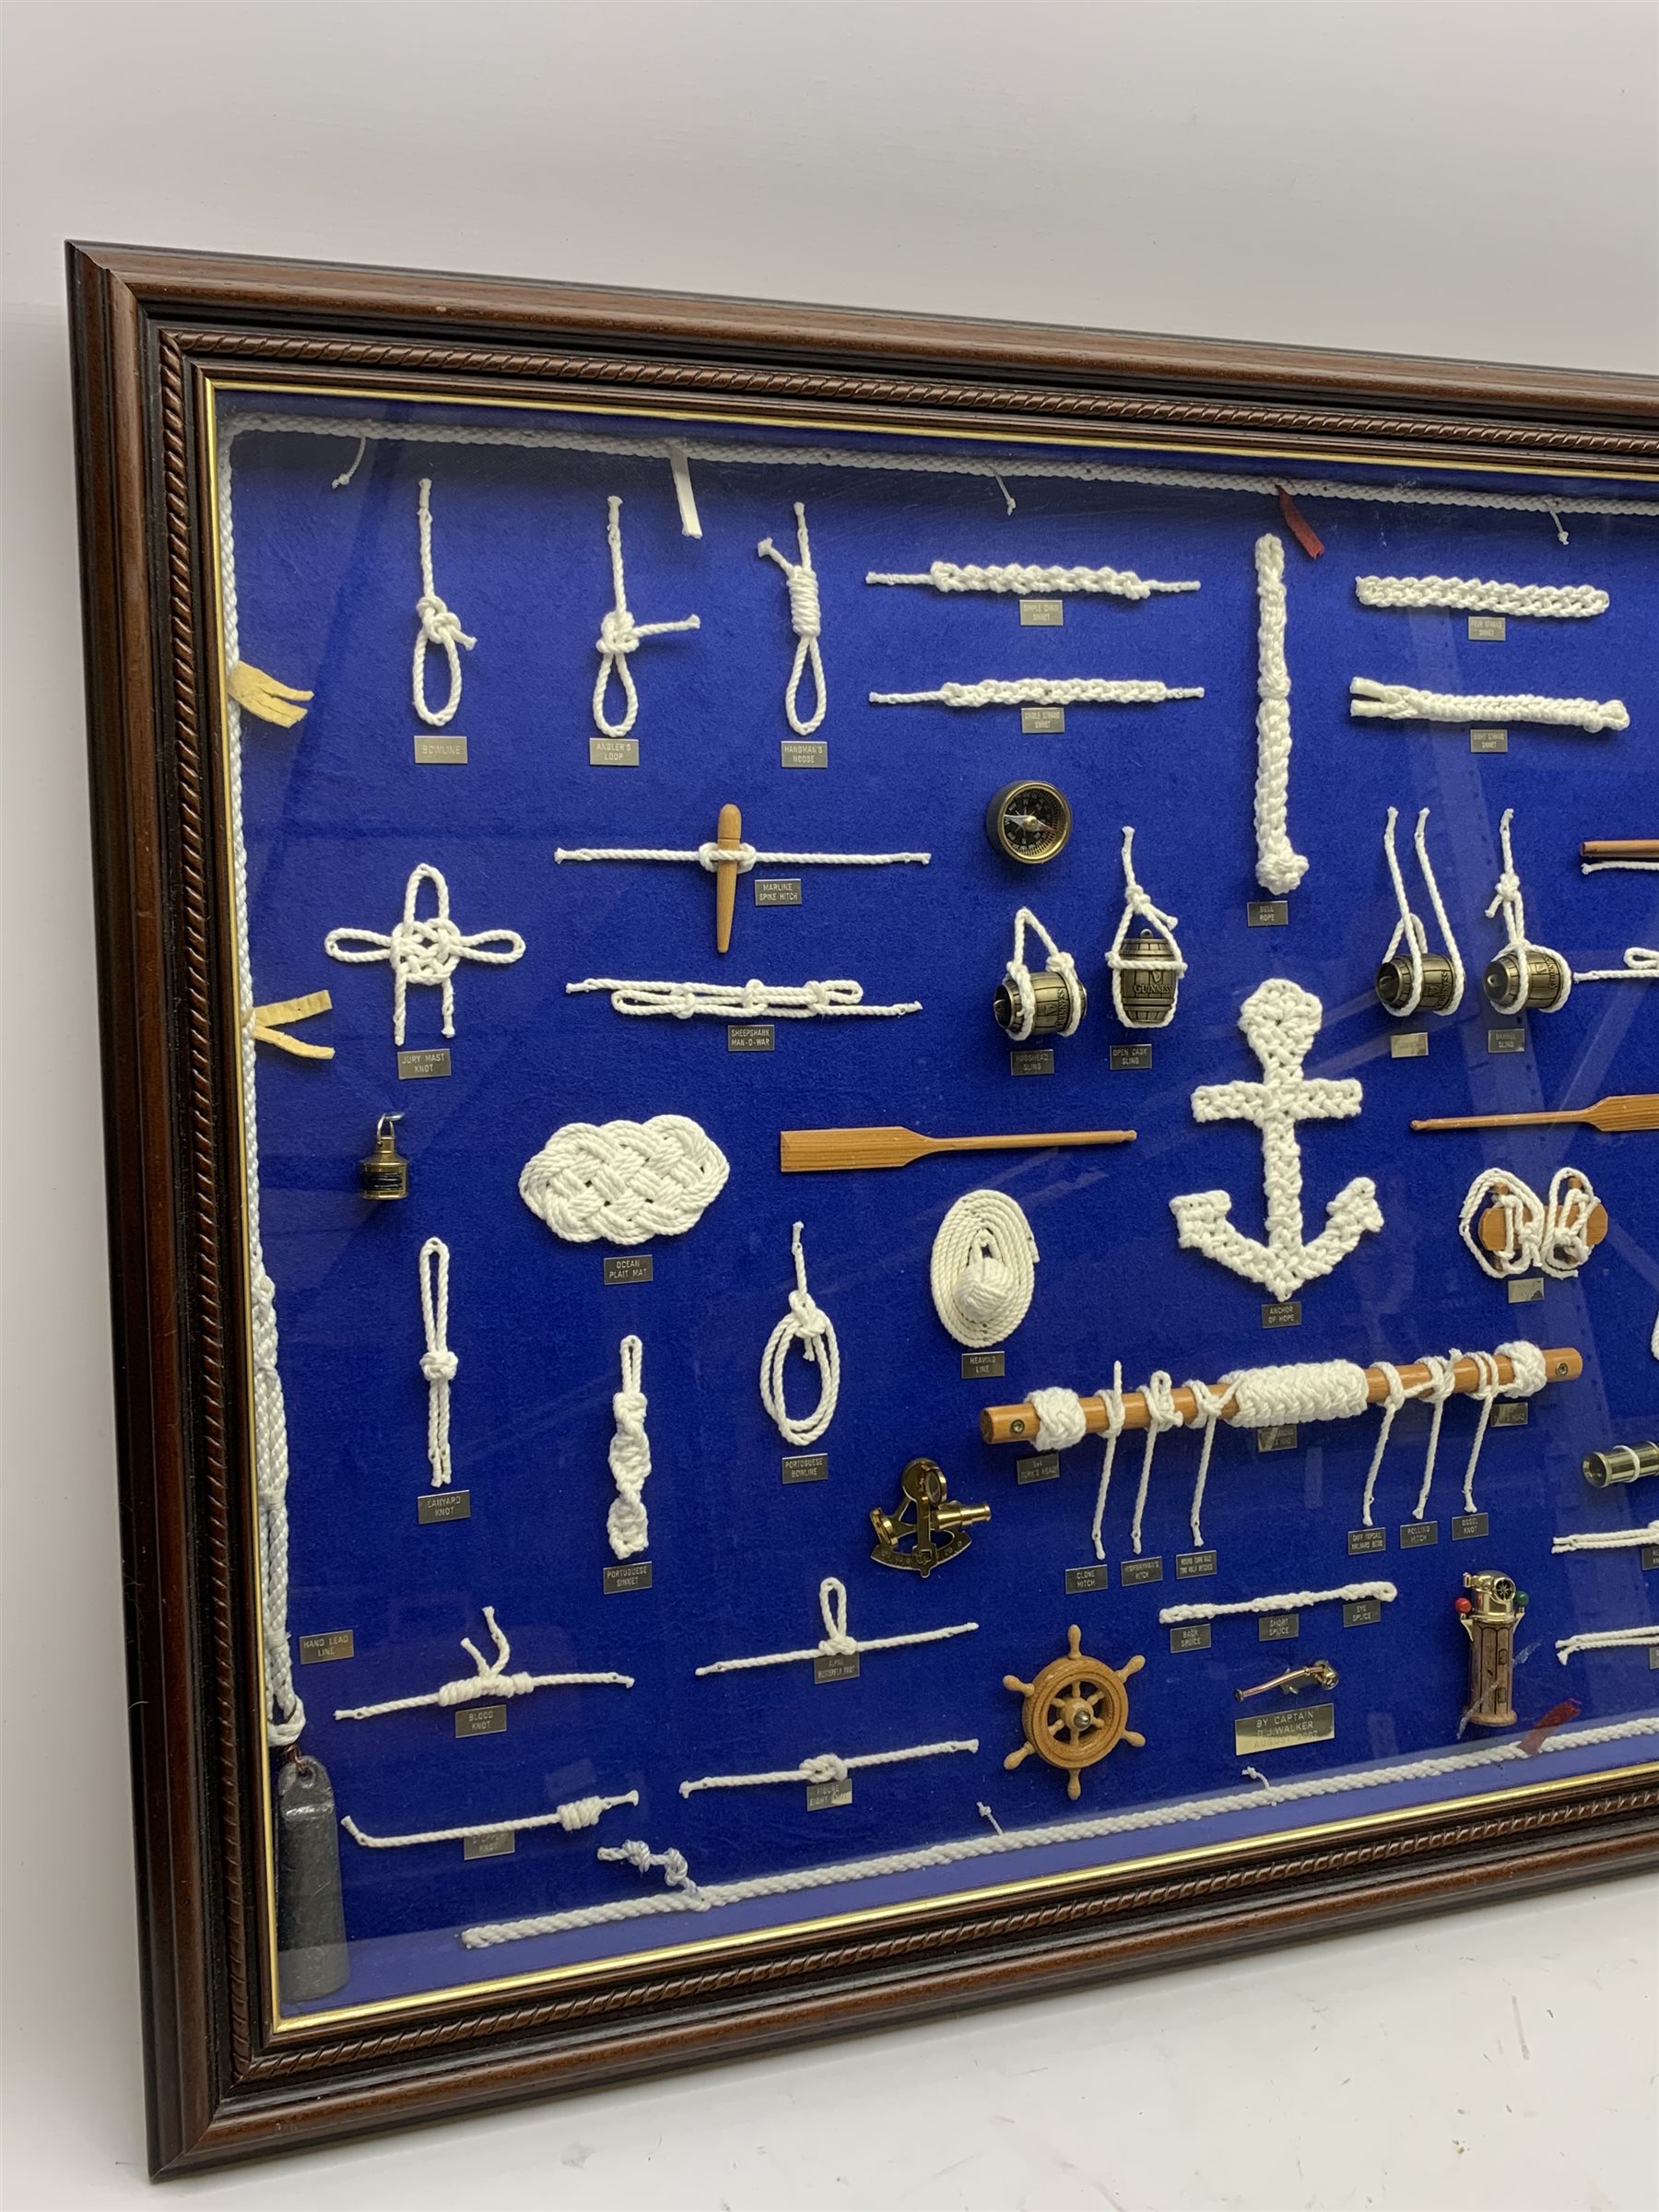 Large framed knot board, including miniature Binnacle, ships wheel and sextant, by Captain D.J.Walk - Image 2 of 3